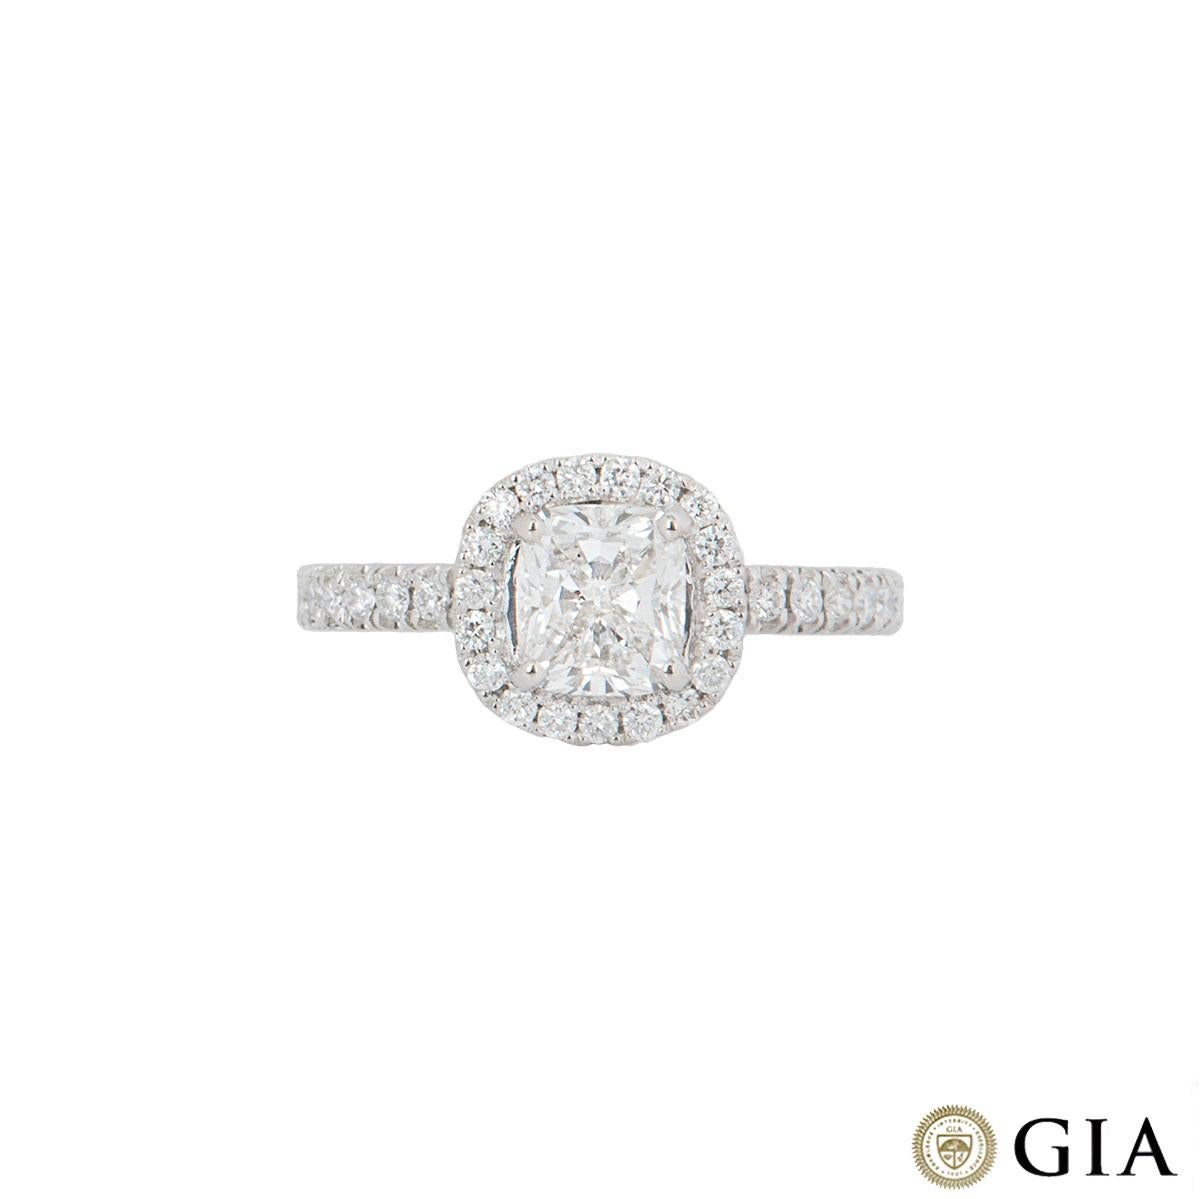 A stunning platinum cushion cut diamond engagement ring. The ring comprises of a cushion cut diamond in a halo setting with a weight of 1.00ct, H in colour and VS1 clarity. The round brilliant diamonds in the halo setting have a total weight of